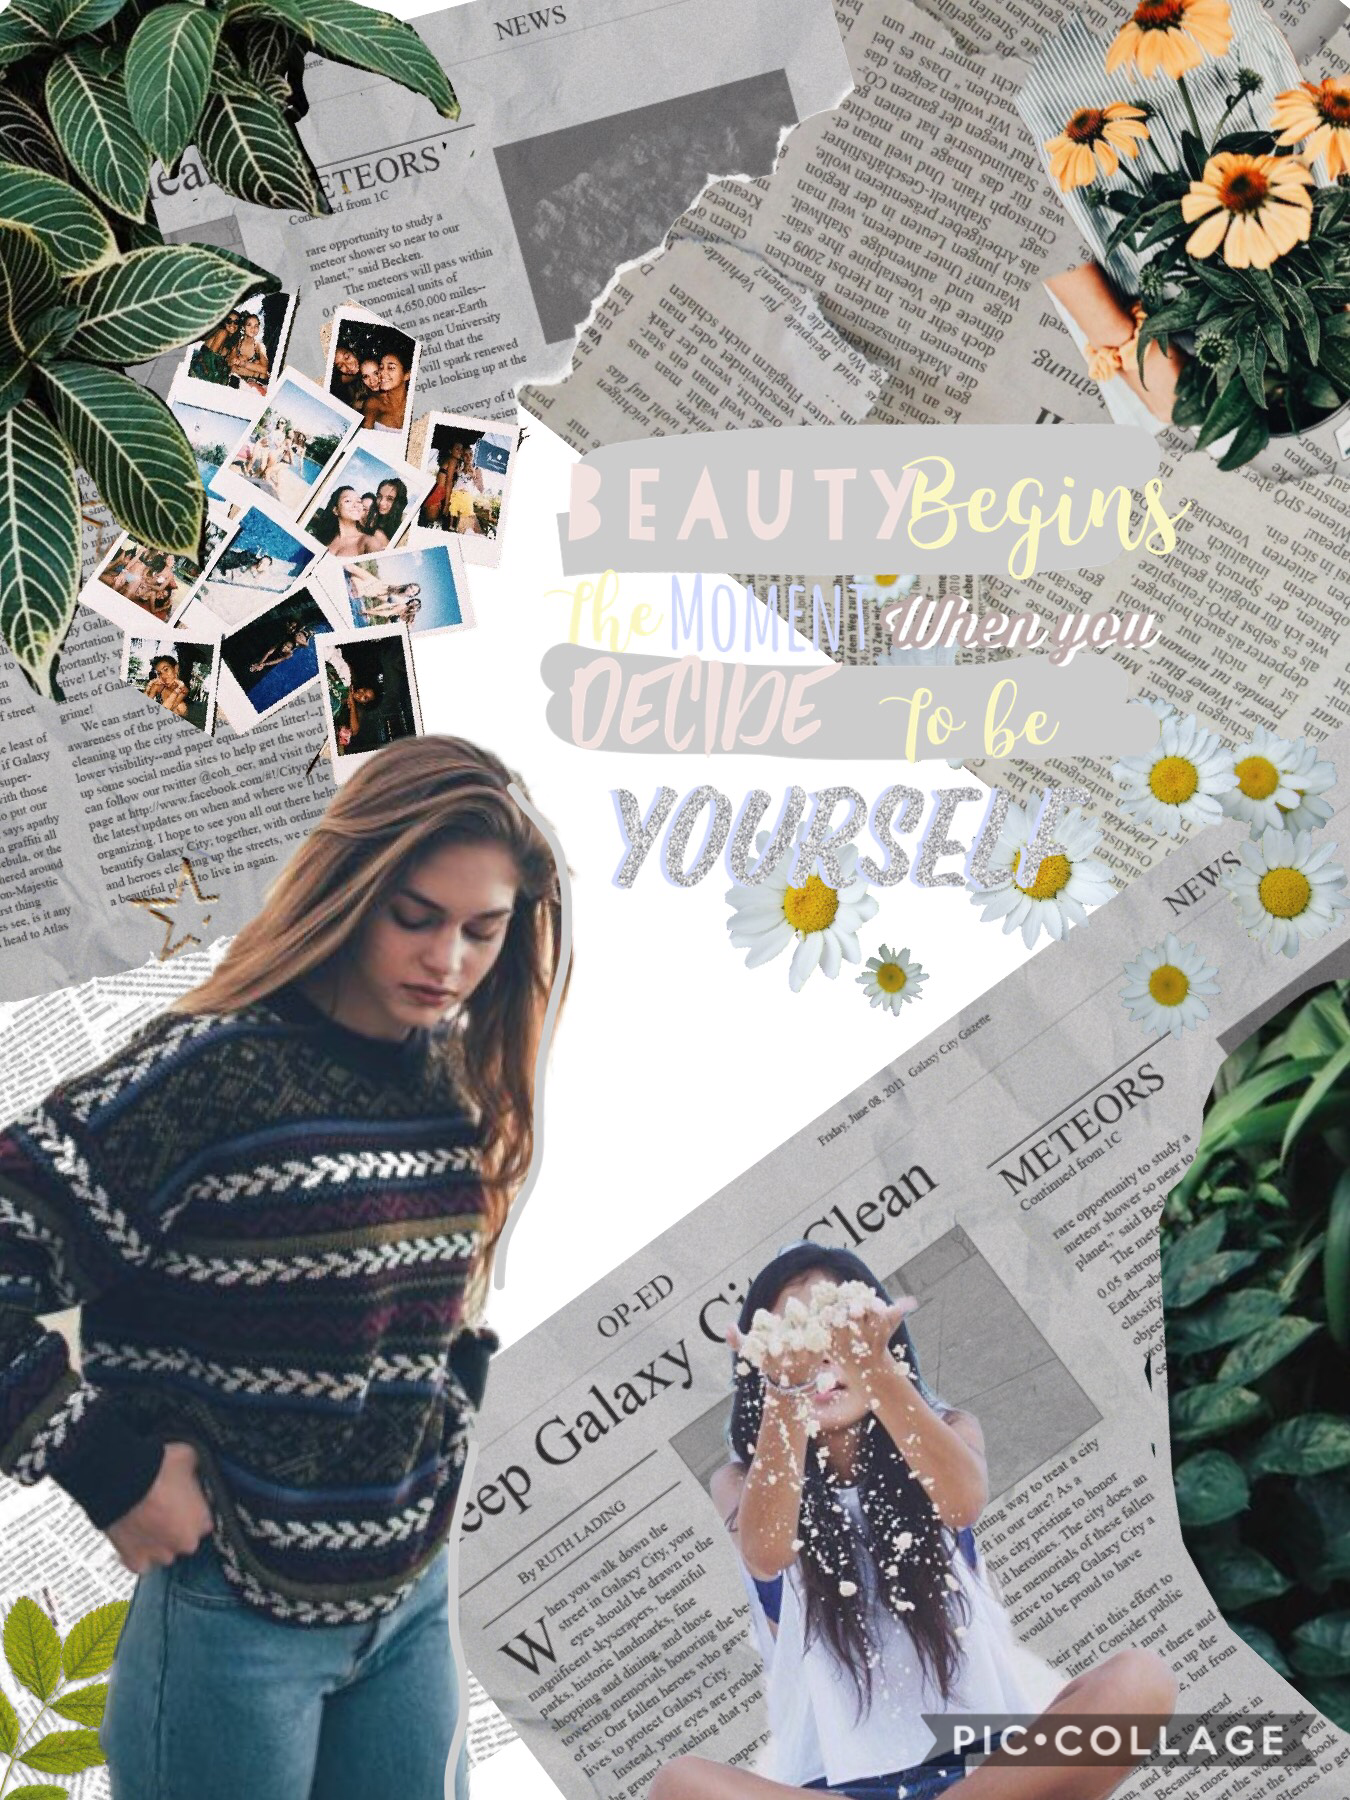 C L I C K 🌸

Real beauty is just being your self💕
Please comment down ideas for my next collage 🌻